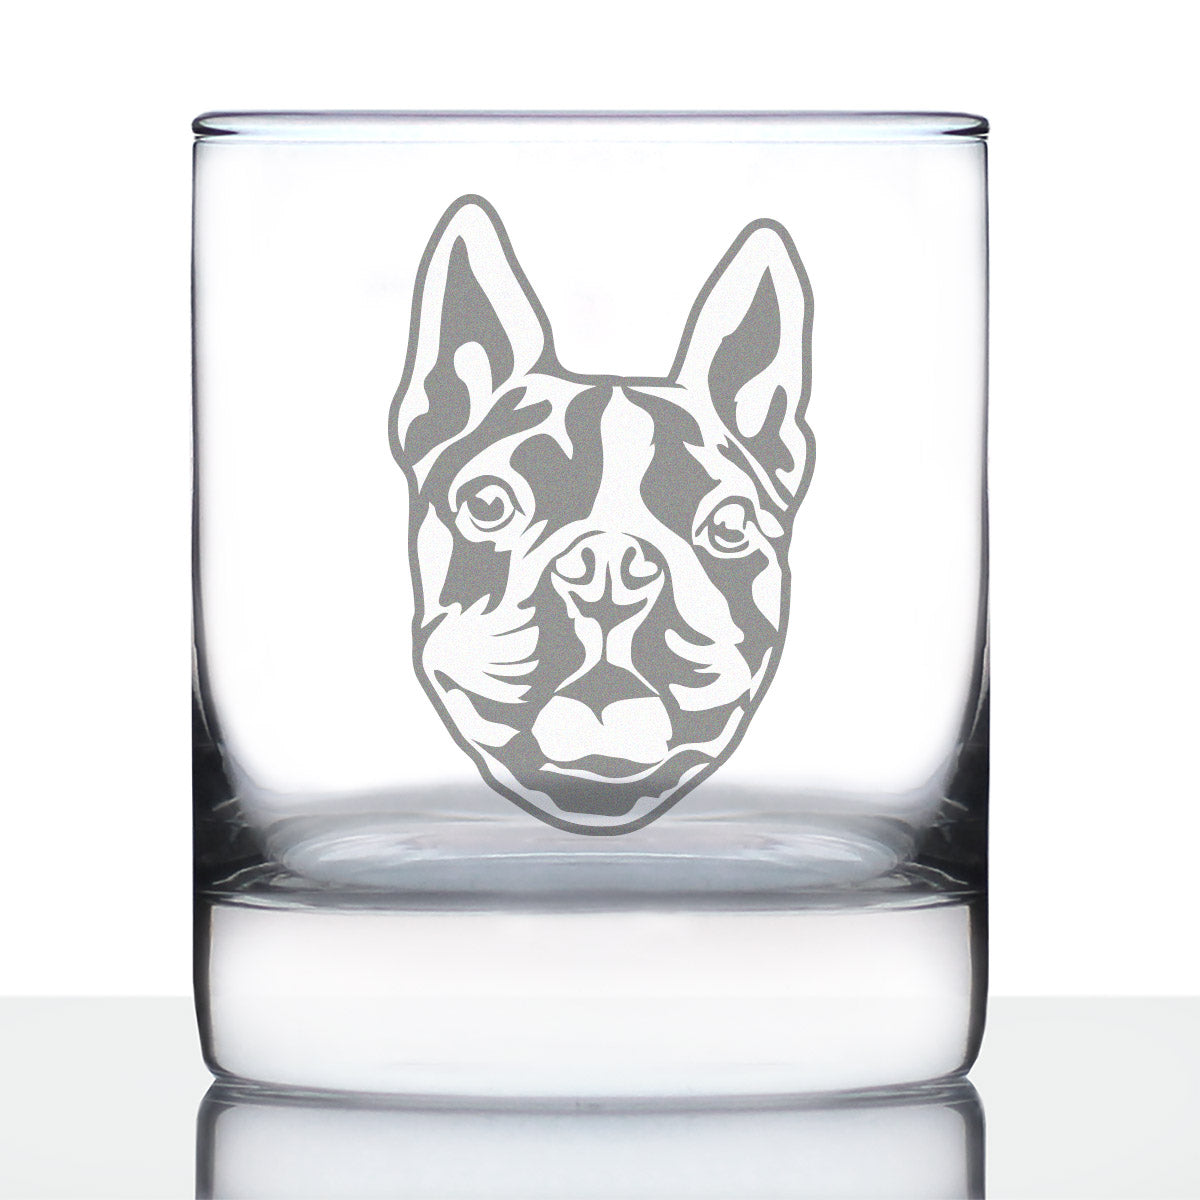 Boston Terrier Face Whiskey Rocks Glass - Unique Dog Themed Decor and Gifts for Moms & Dads of Boston Terriers - 10.25 Oz